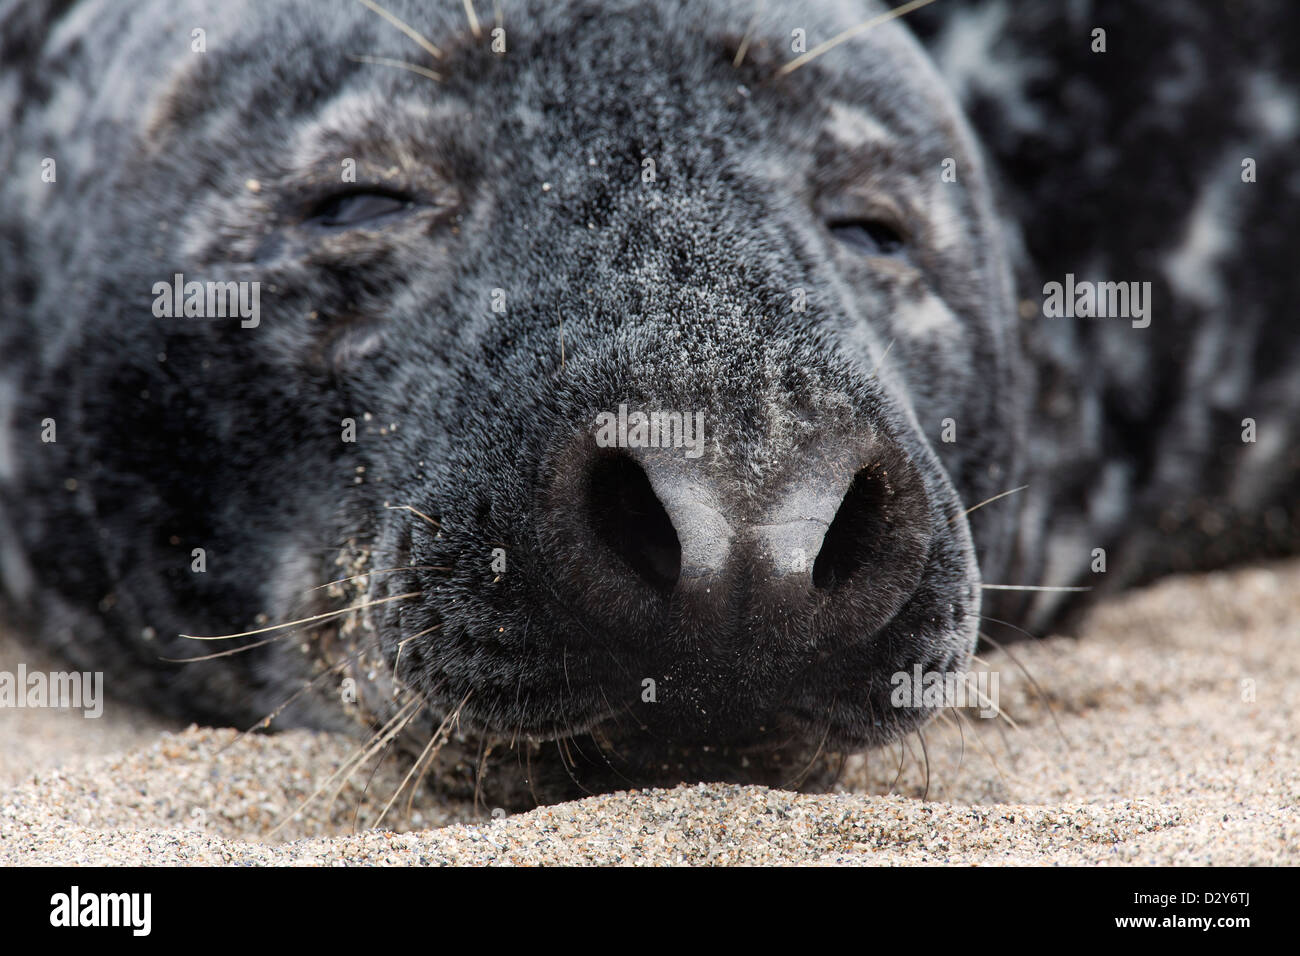 Grey seal / gray seal (Halichoerus grypus) resting on beach, close up of nose, nostrils and whiskers Stock Photo